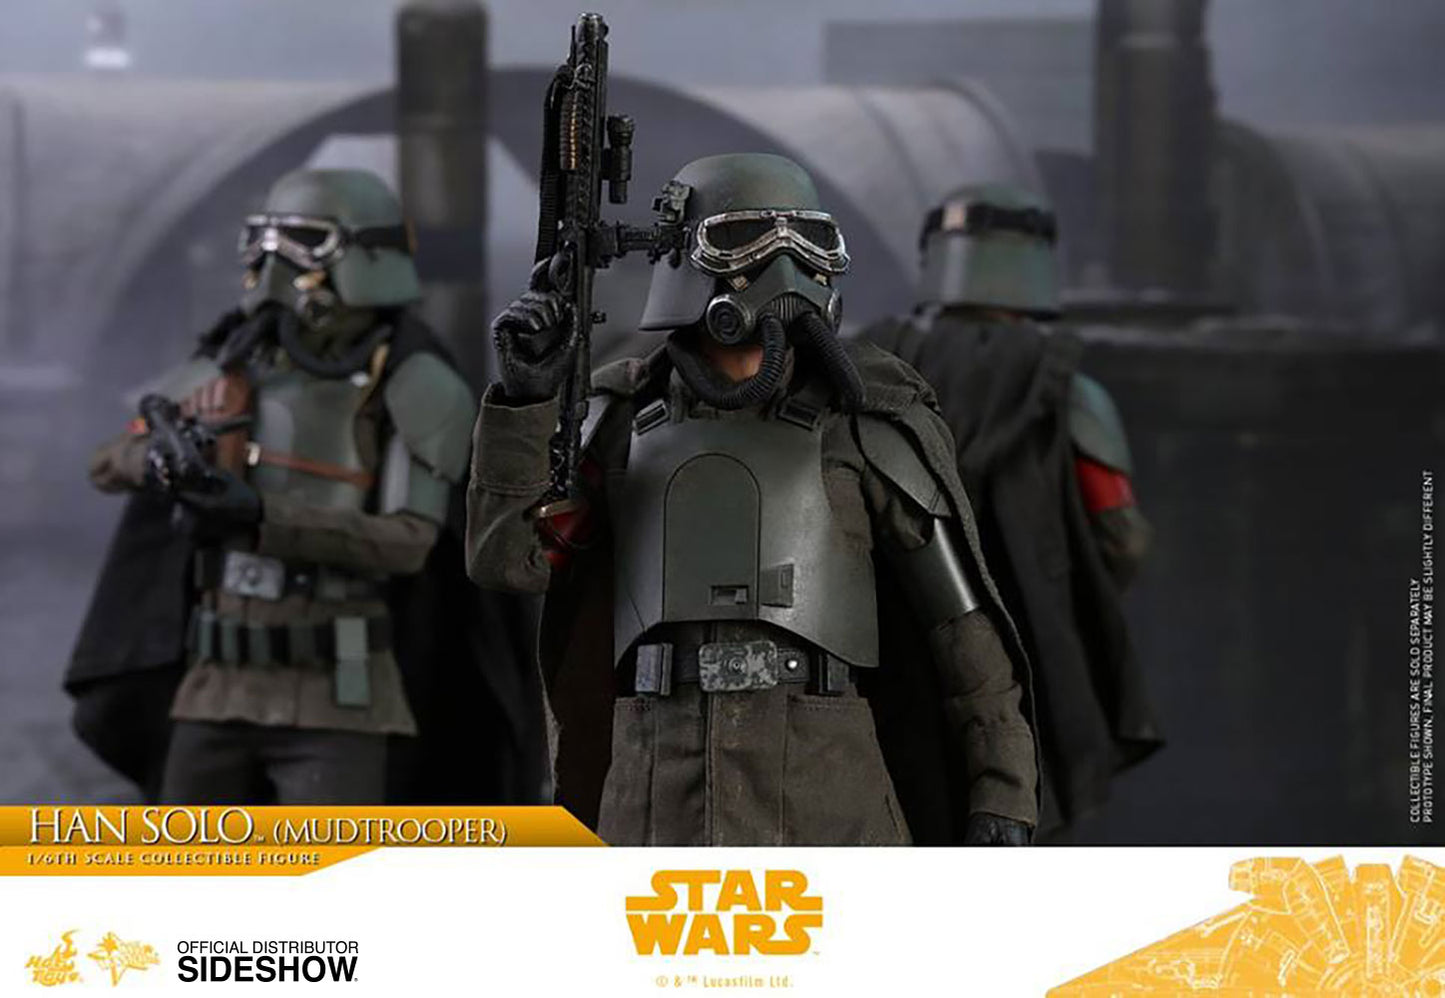 Han Solo Mudtrooper - Sixth Scale Figure by Hot Toys